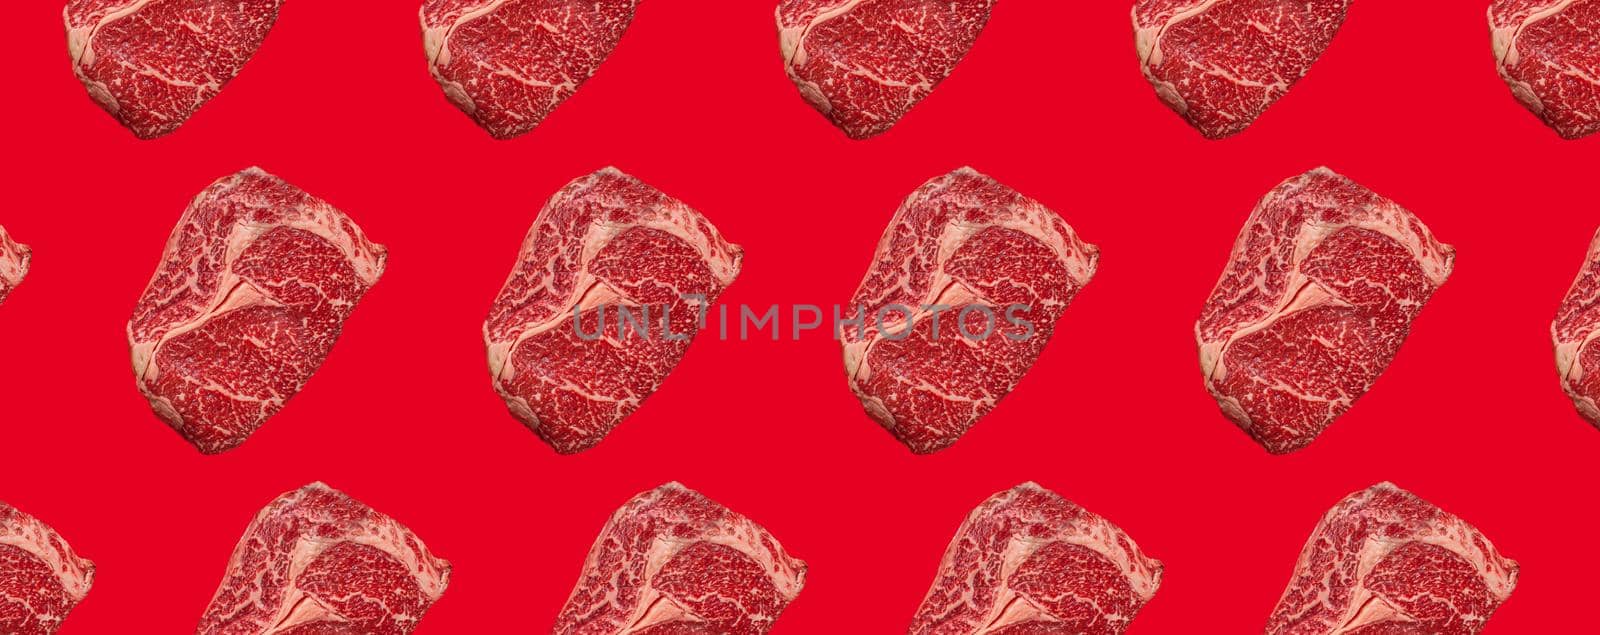 Pattern made of raw meat beef marbled prime cut steak Ribeye on red clean background by its_al_dente